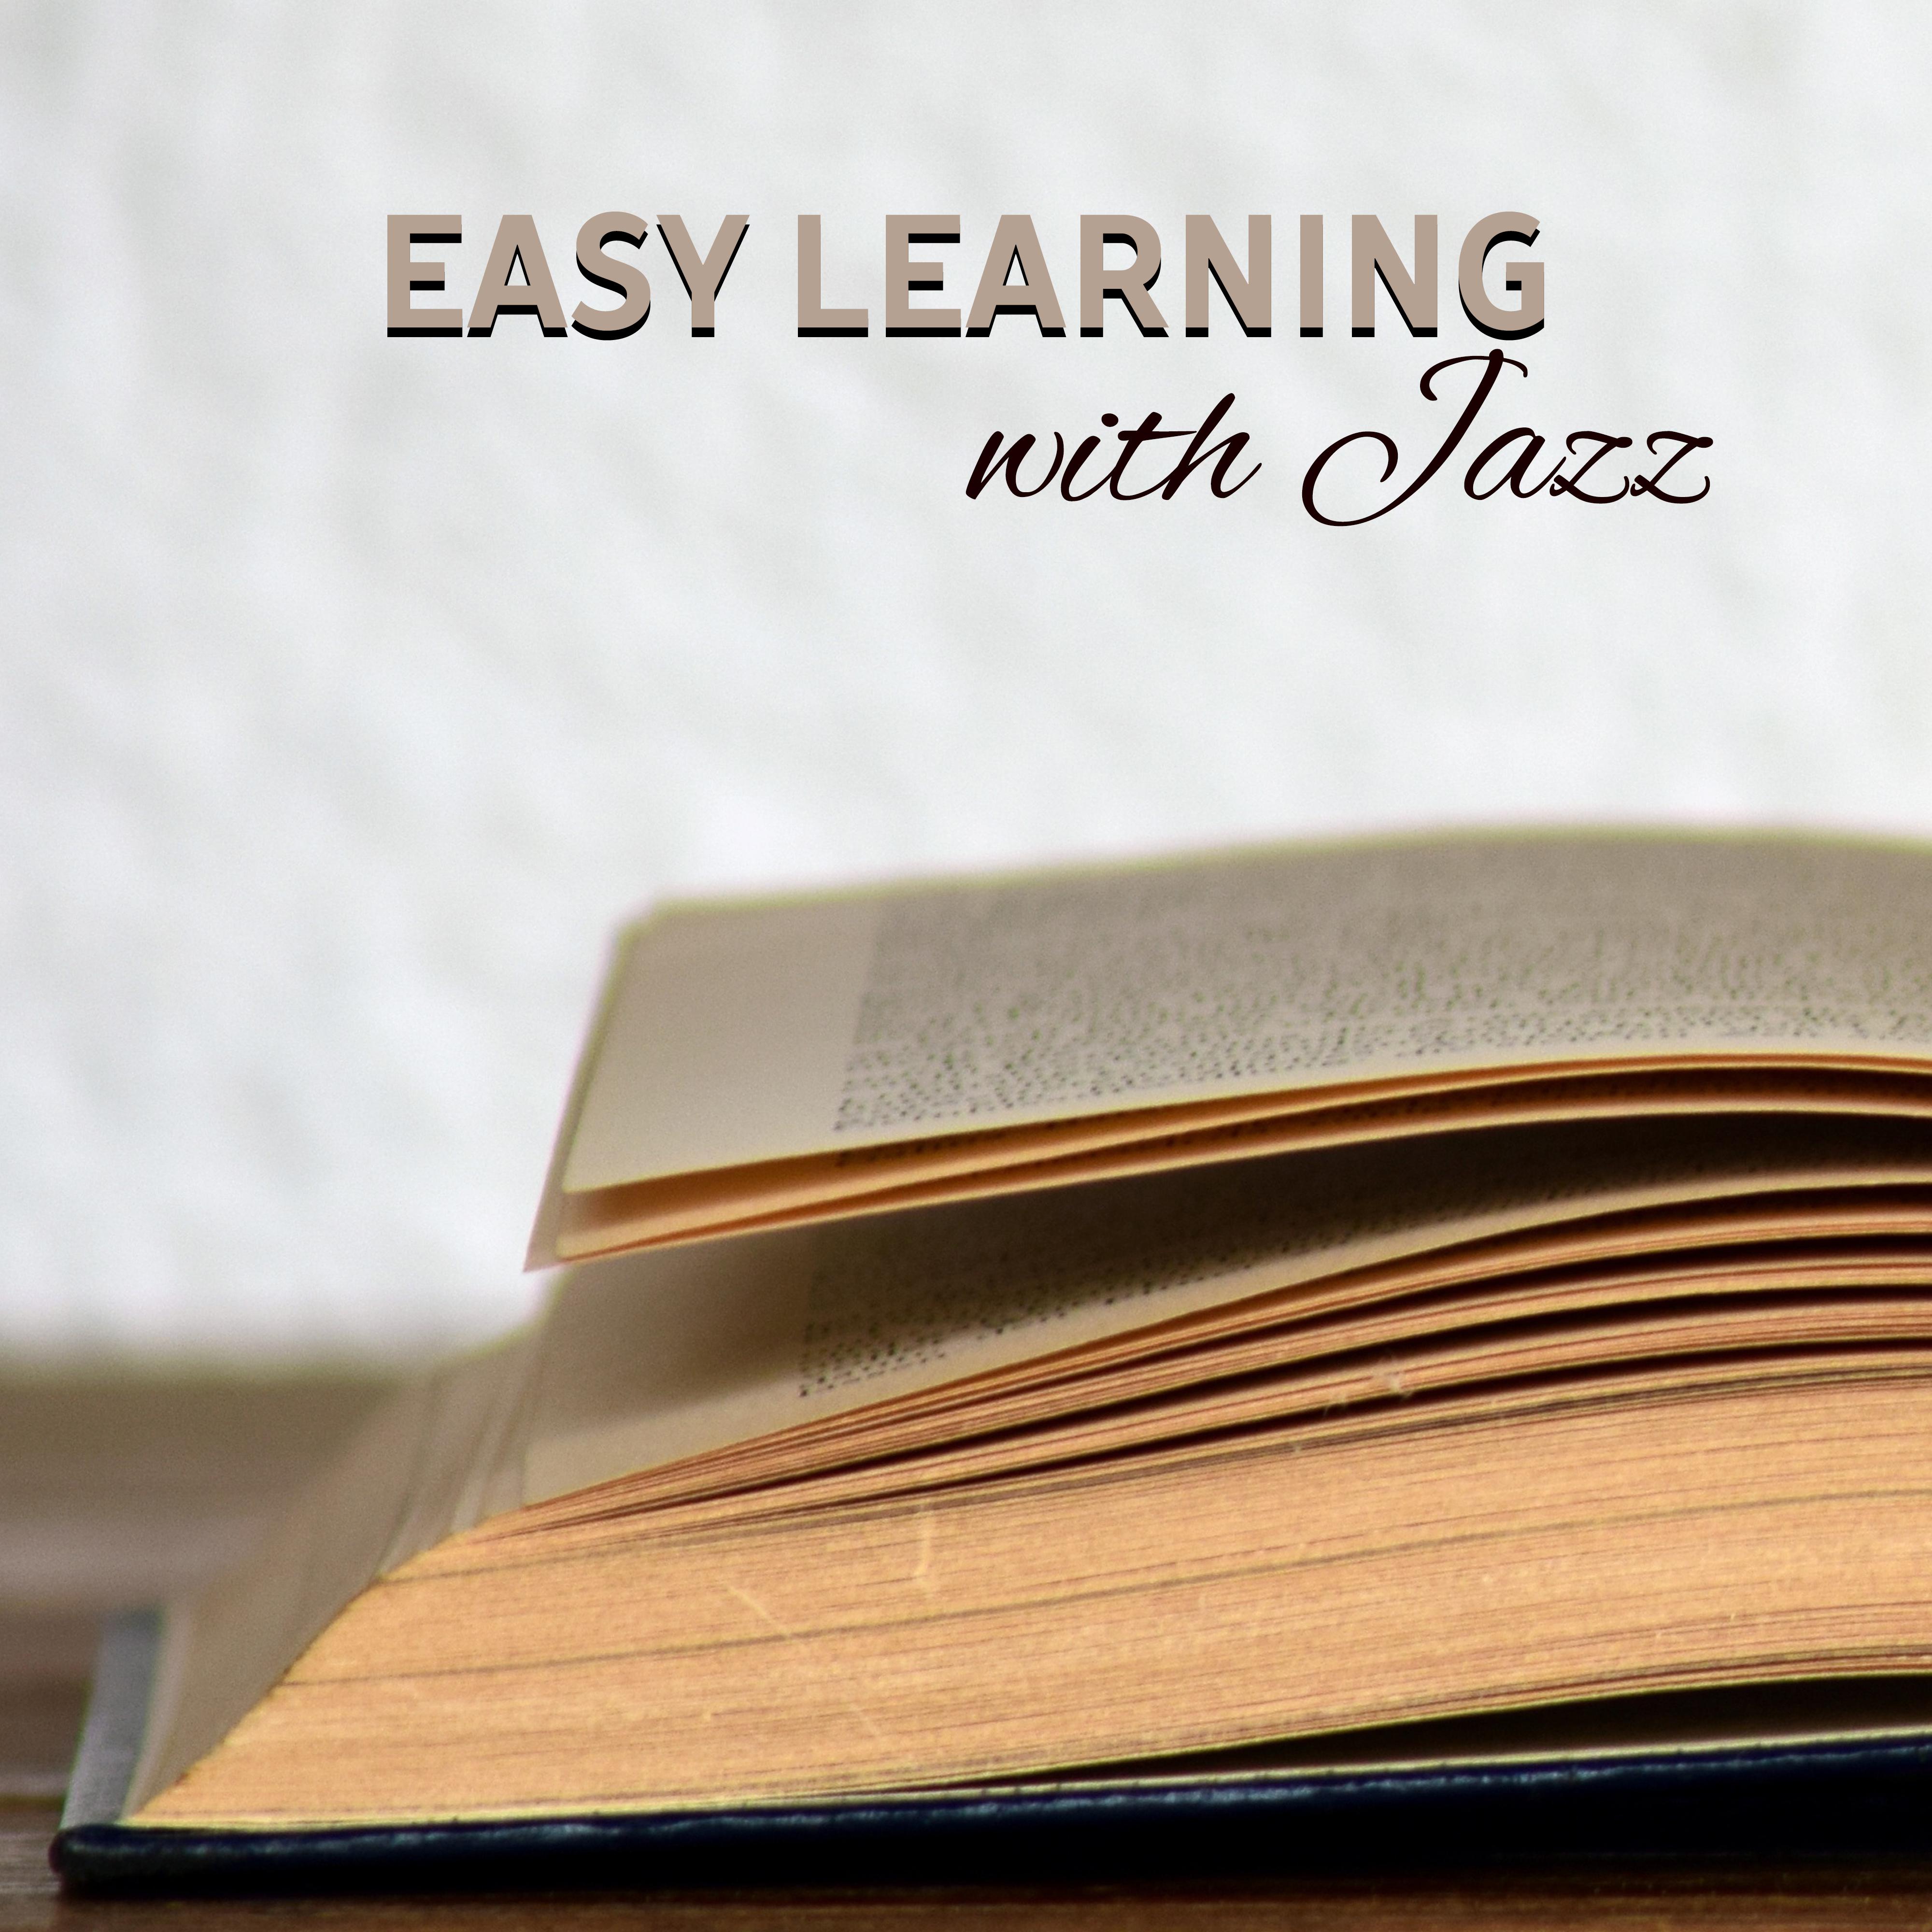 Easy Learning with Jazz – Study Music, Better Concentration, Instrumental Sounds Help Pass Exam, Stress Relief, Brain Power